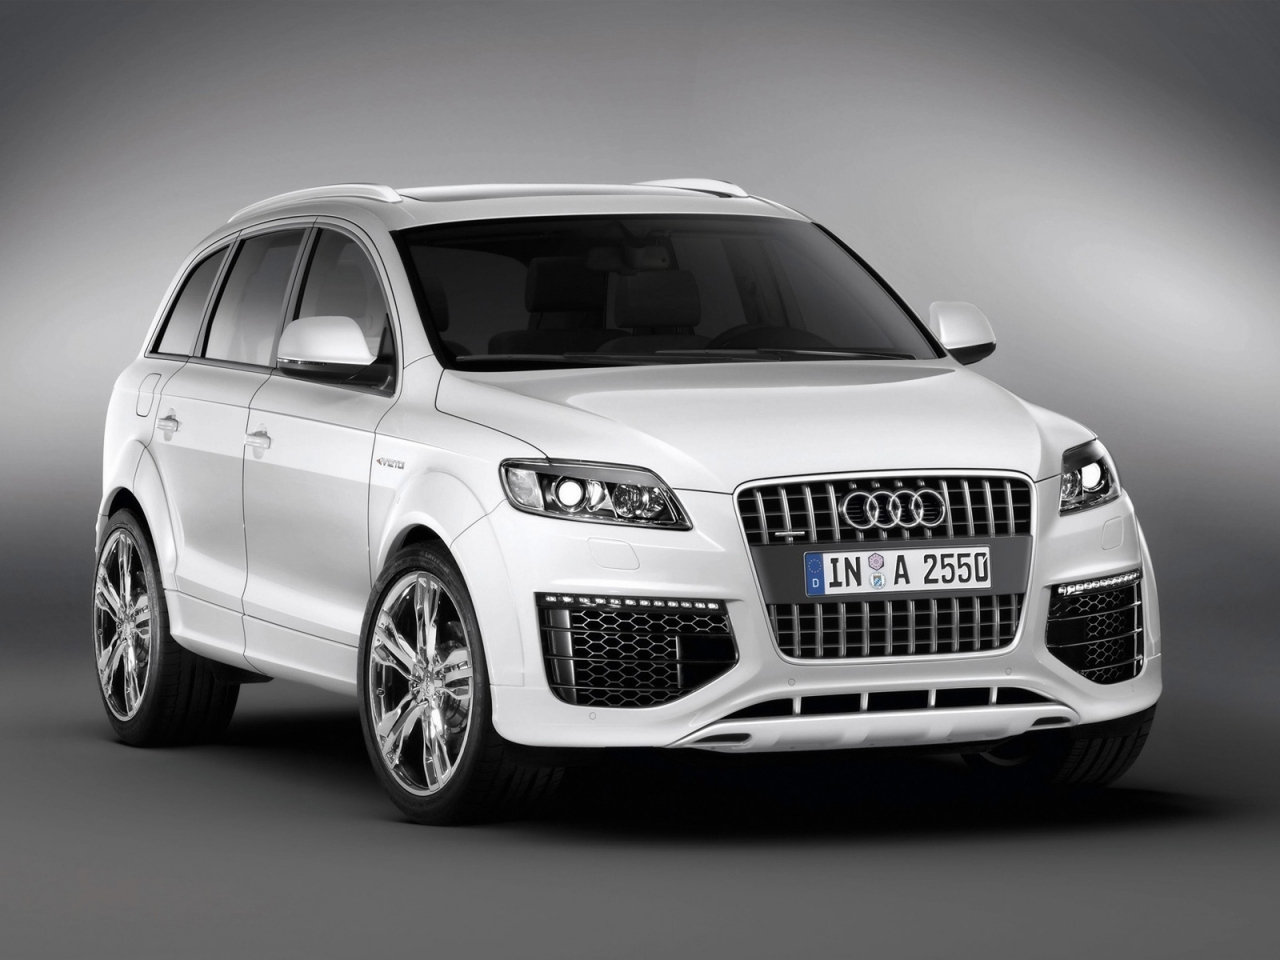 Audi Q7 Coastline front and side for 1280 x 960 resolution